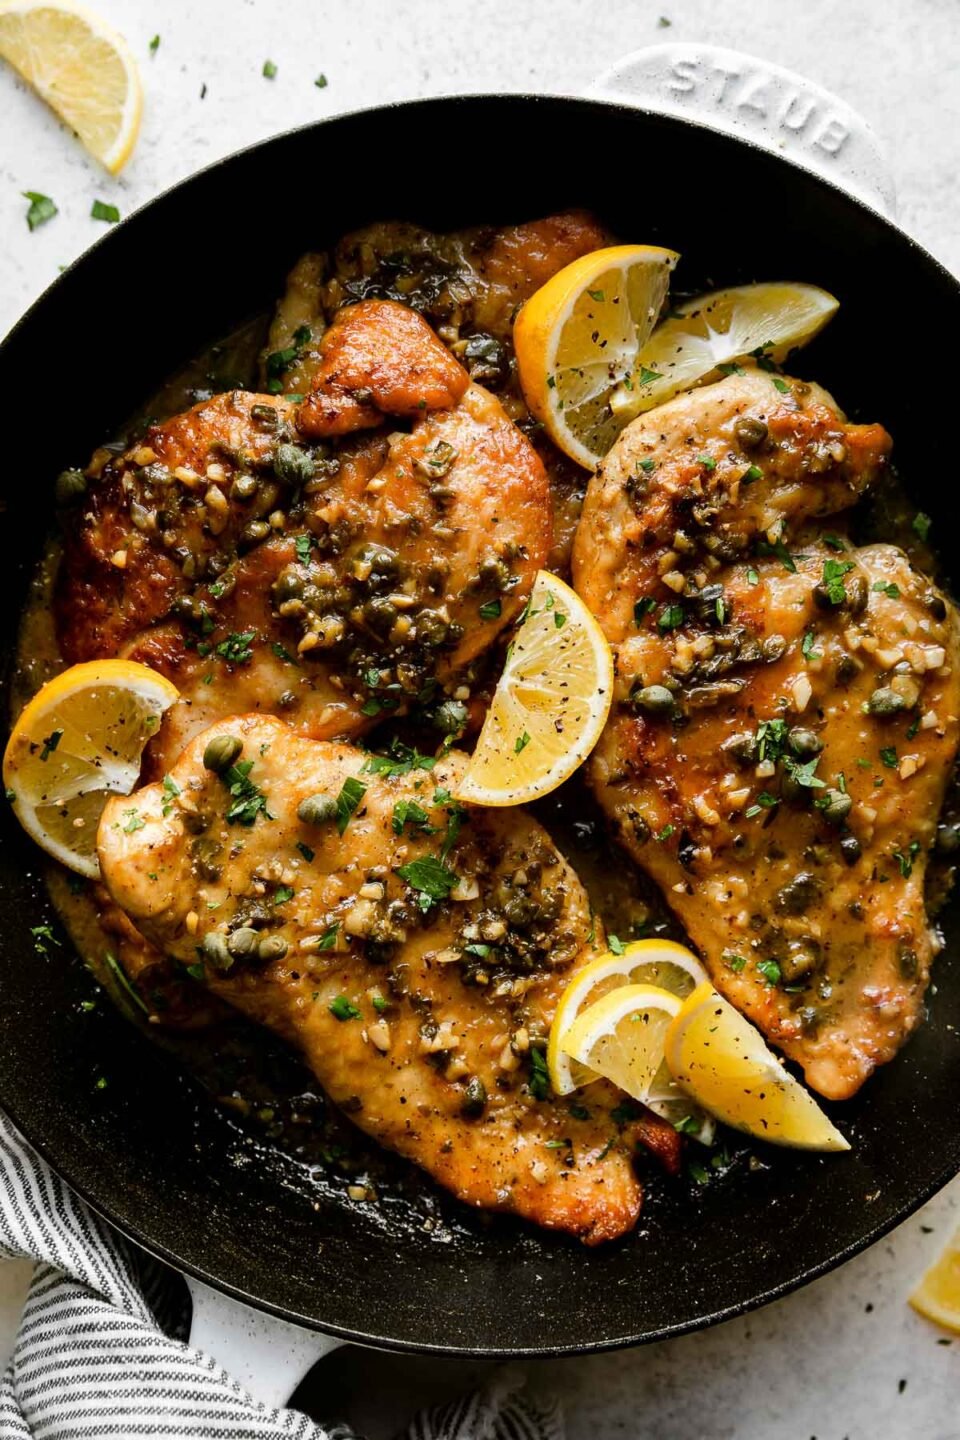 An overhead shot of a white Staub cast iron skillet sits atop a creamy white textured surface filled with finished Meyer Lemon Chicken Piccata. The chicken cutlets have Meyer Lemon pan sauce spooned on top and garnished with chopped fresh herbs and Meyer Lemon wedges. Lemon wedges and a white and blue linen napkin surround the skillet.